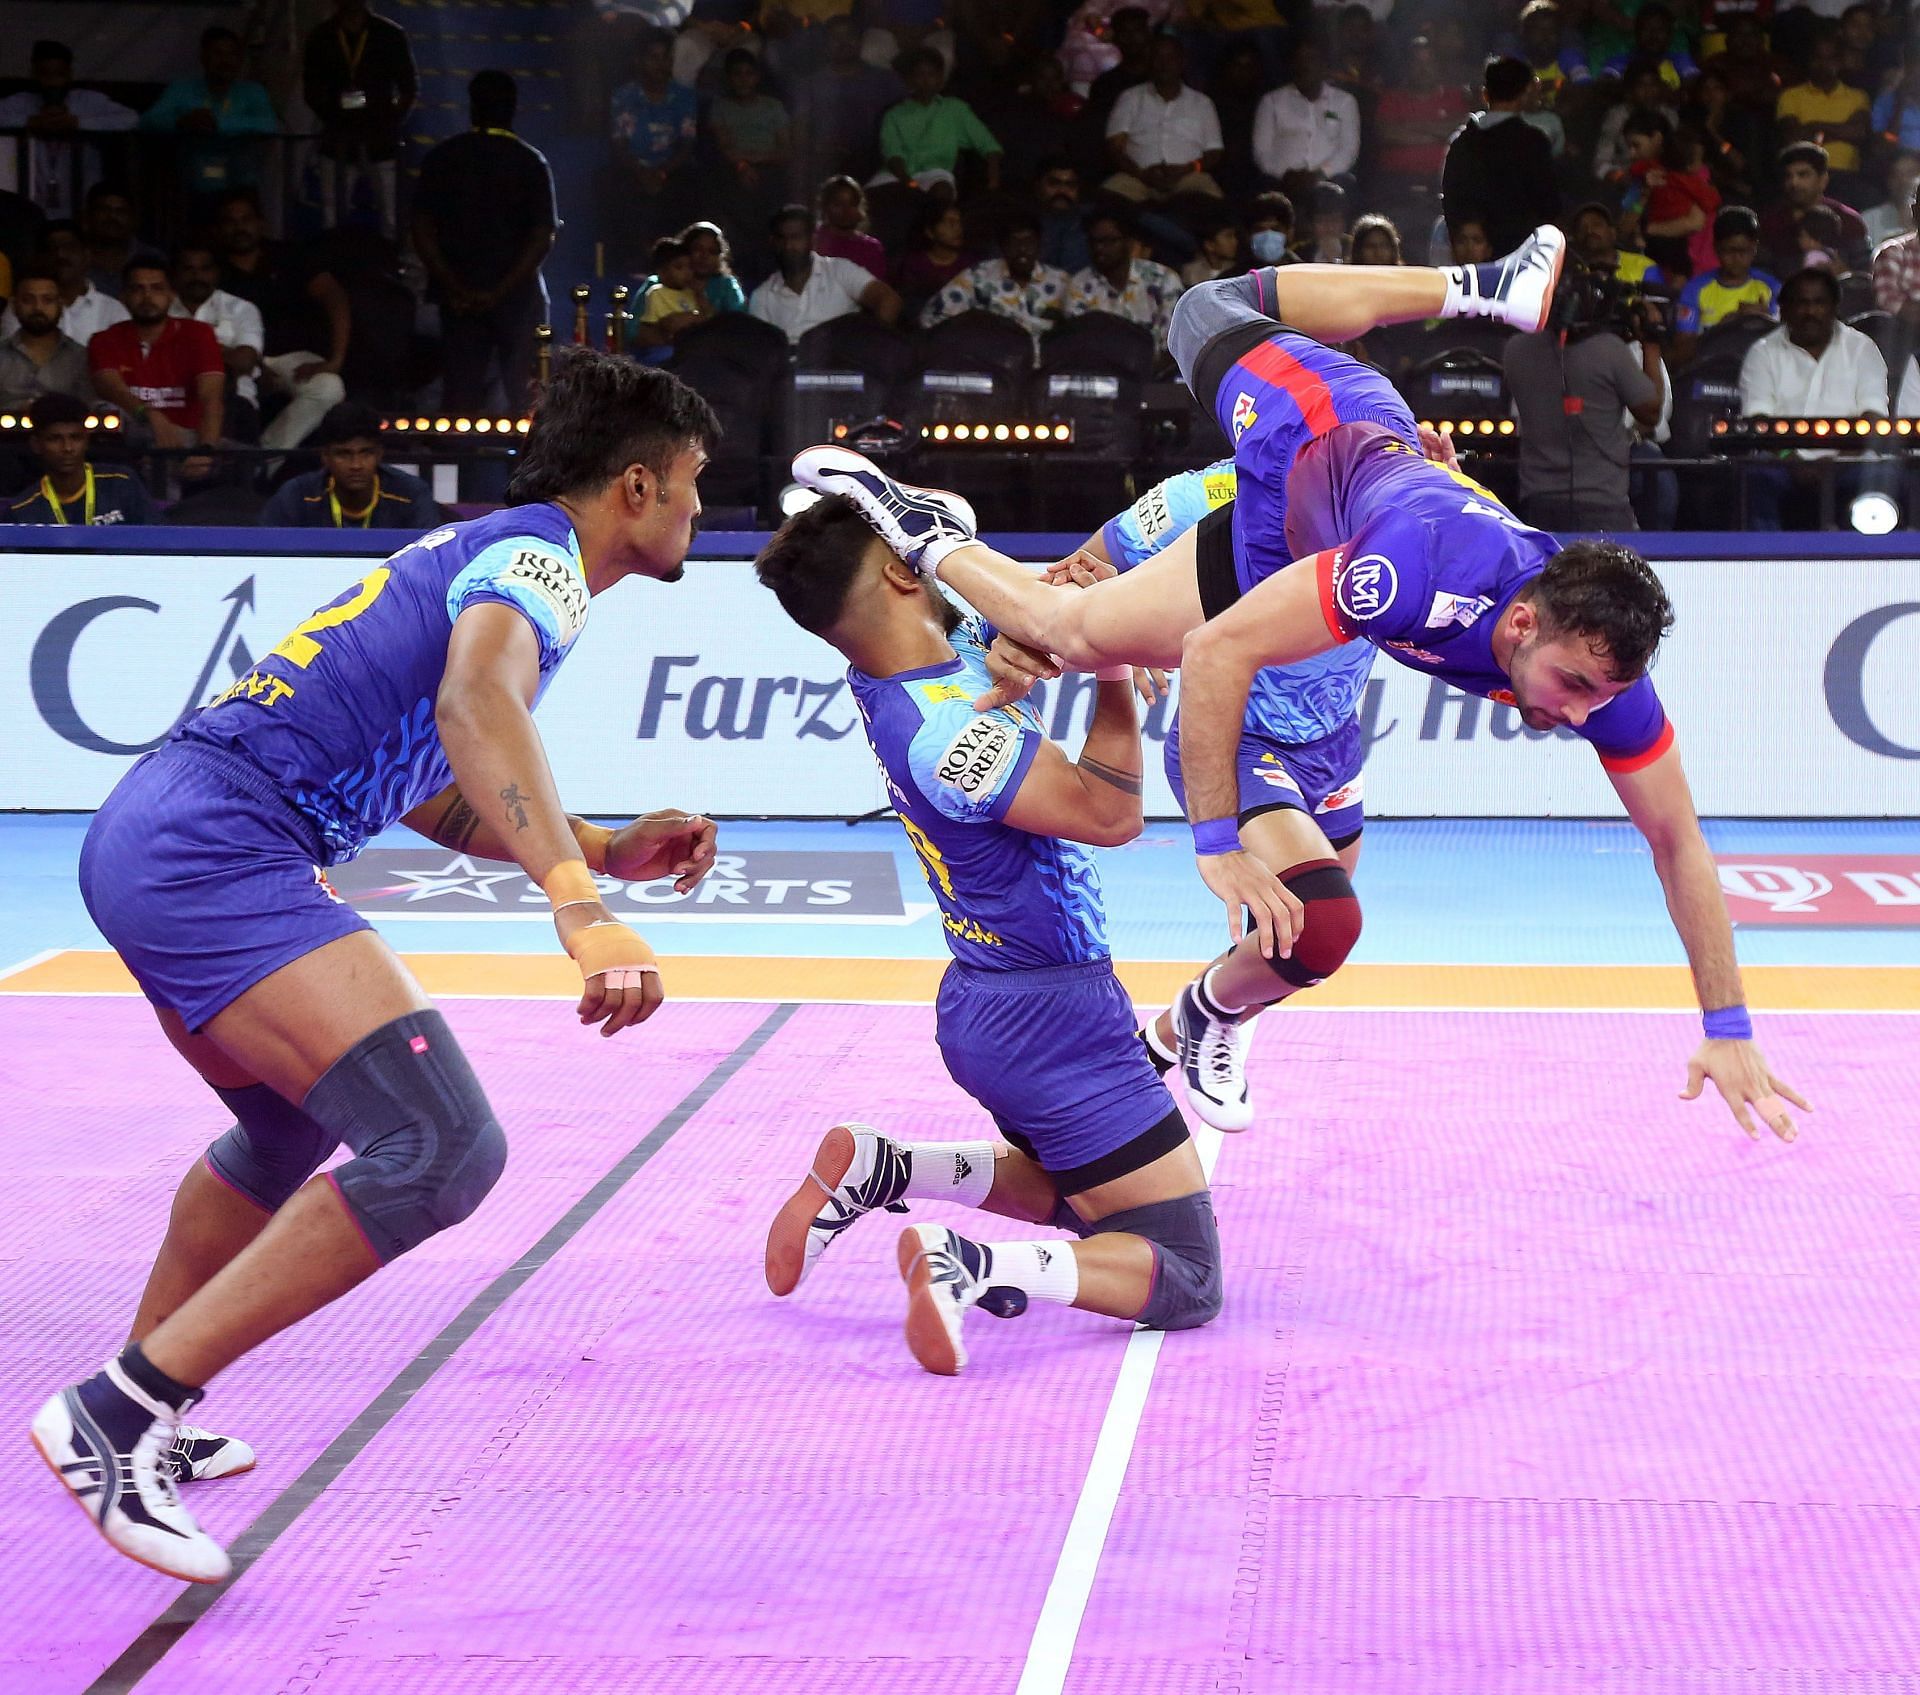 Shubham Shinde with a thigh-hold of Manjeet (Credits: PKL)